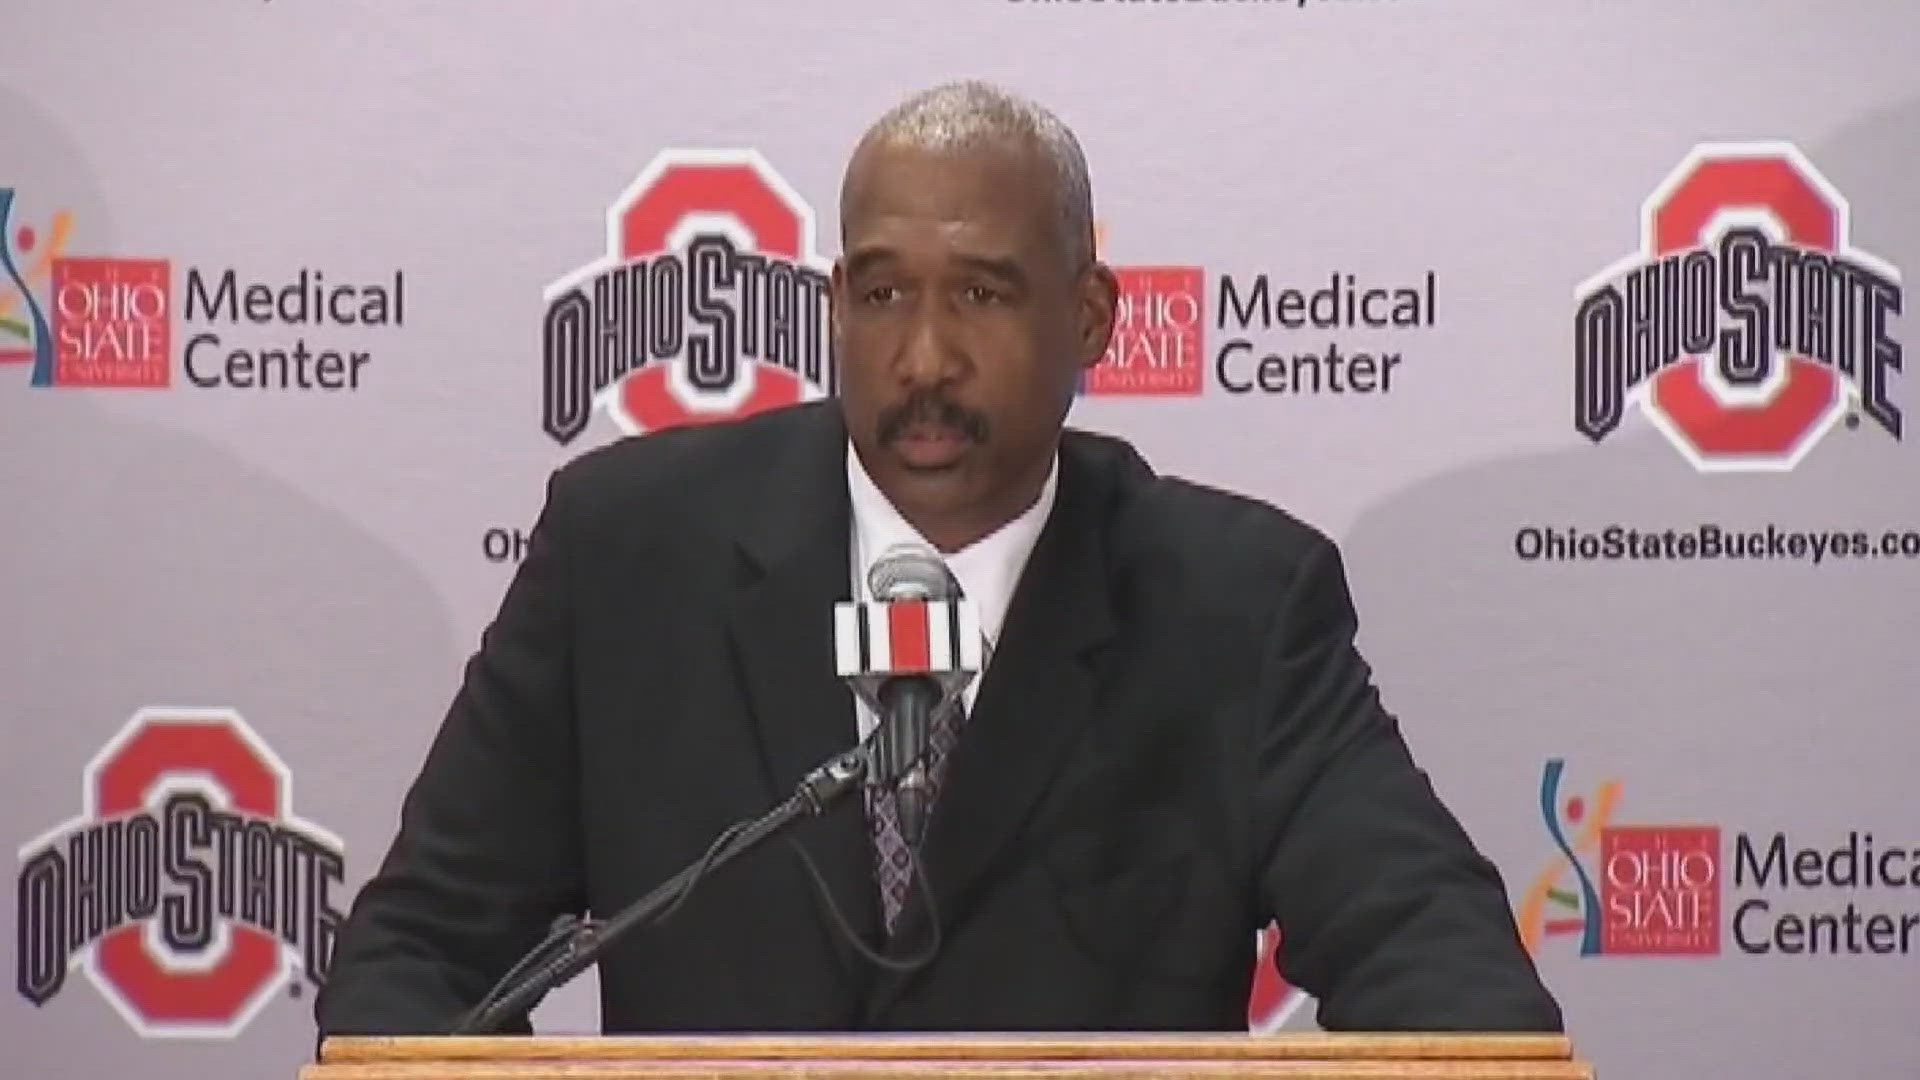 Smith is wrapping up his 19-year career at Ohio State this week.